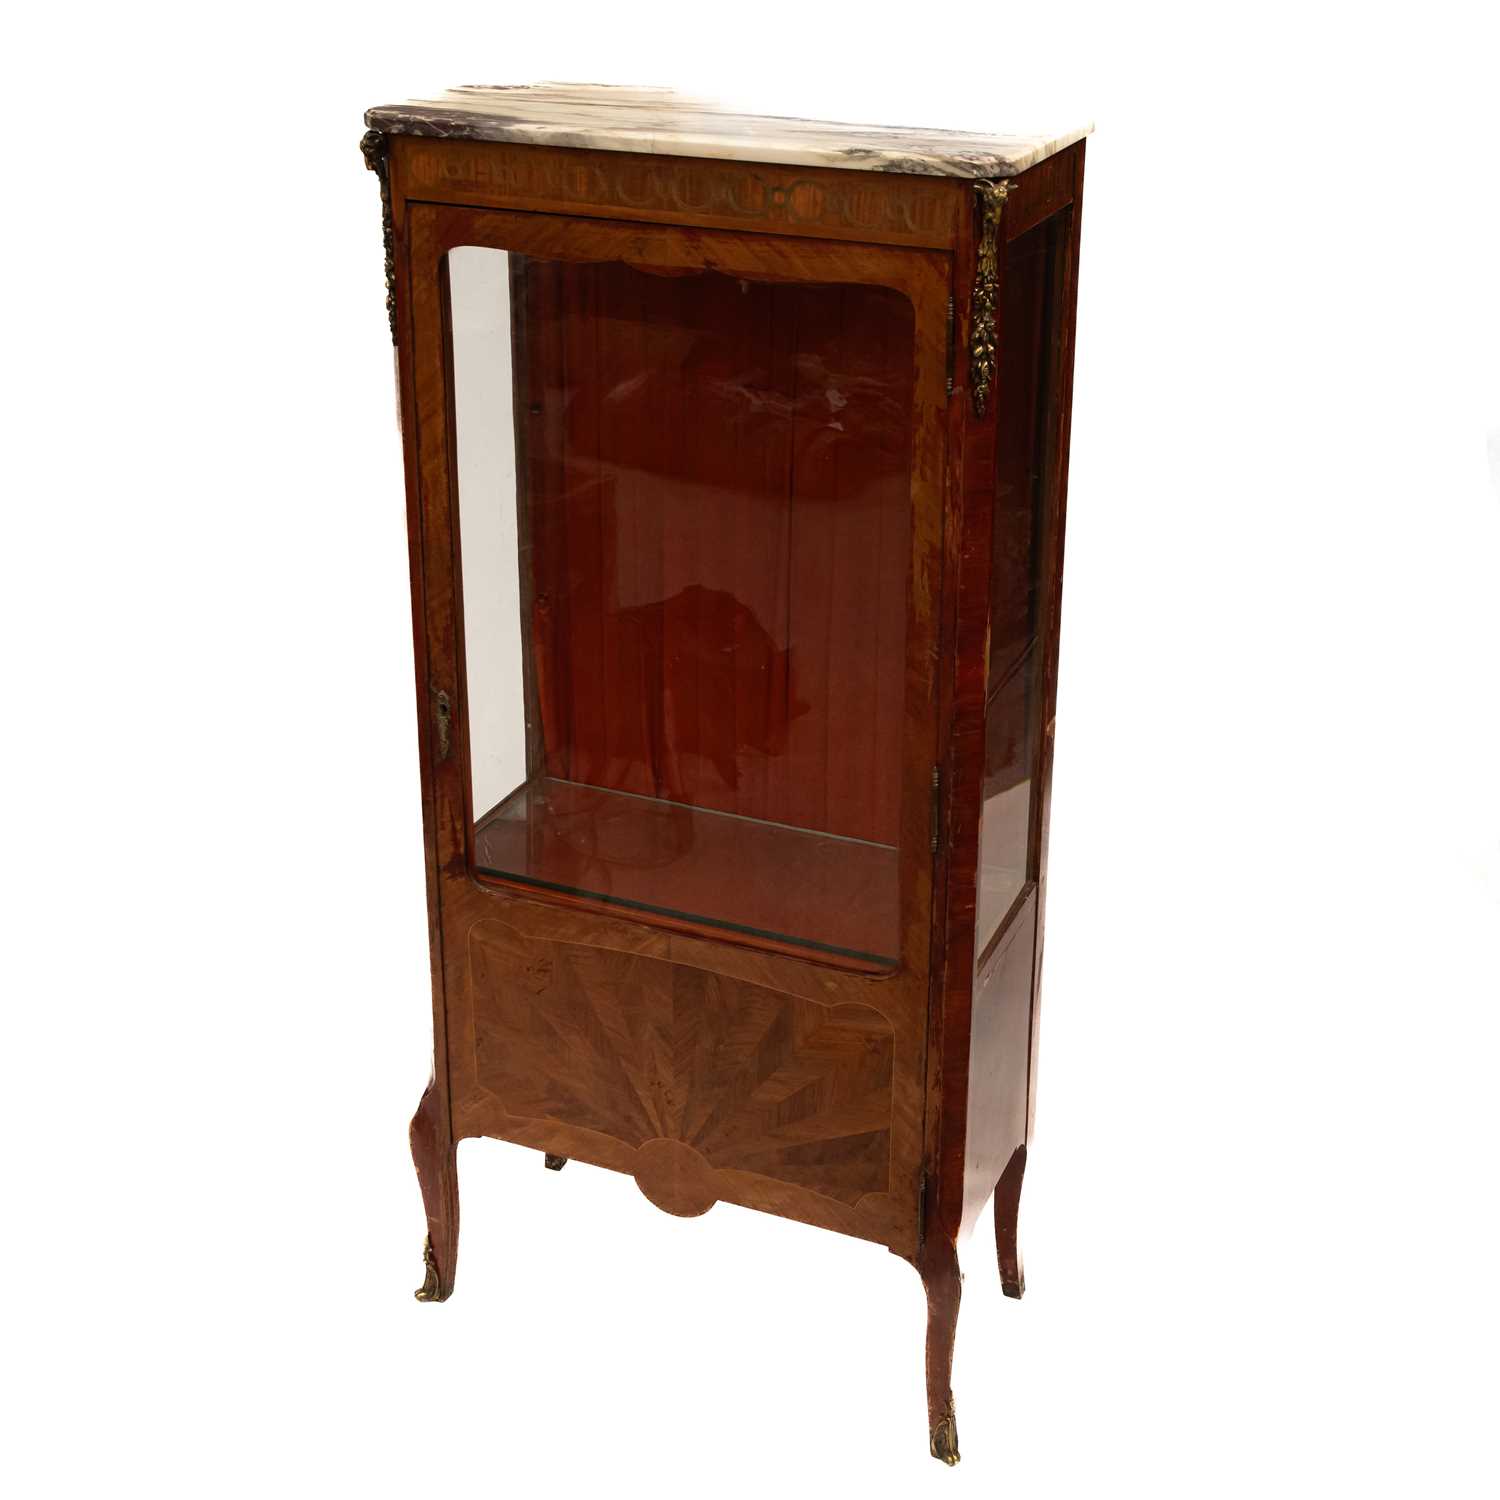 AN EARLY 20TH CENTURY FRENCH MARBLE-TOPPED AND INLAID VIRTINE